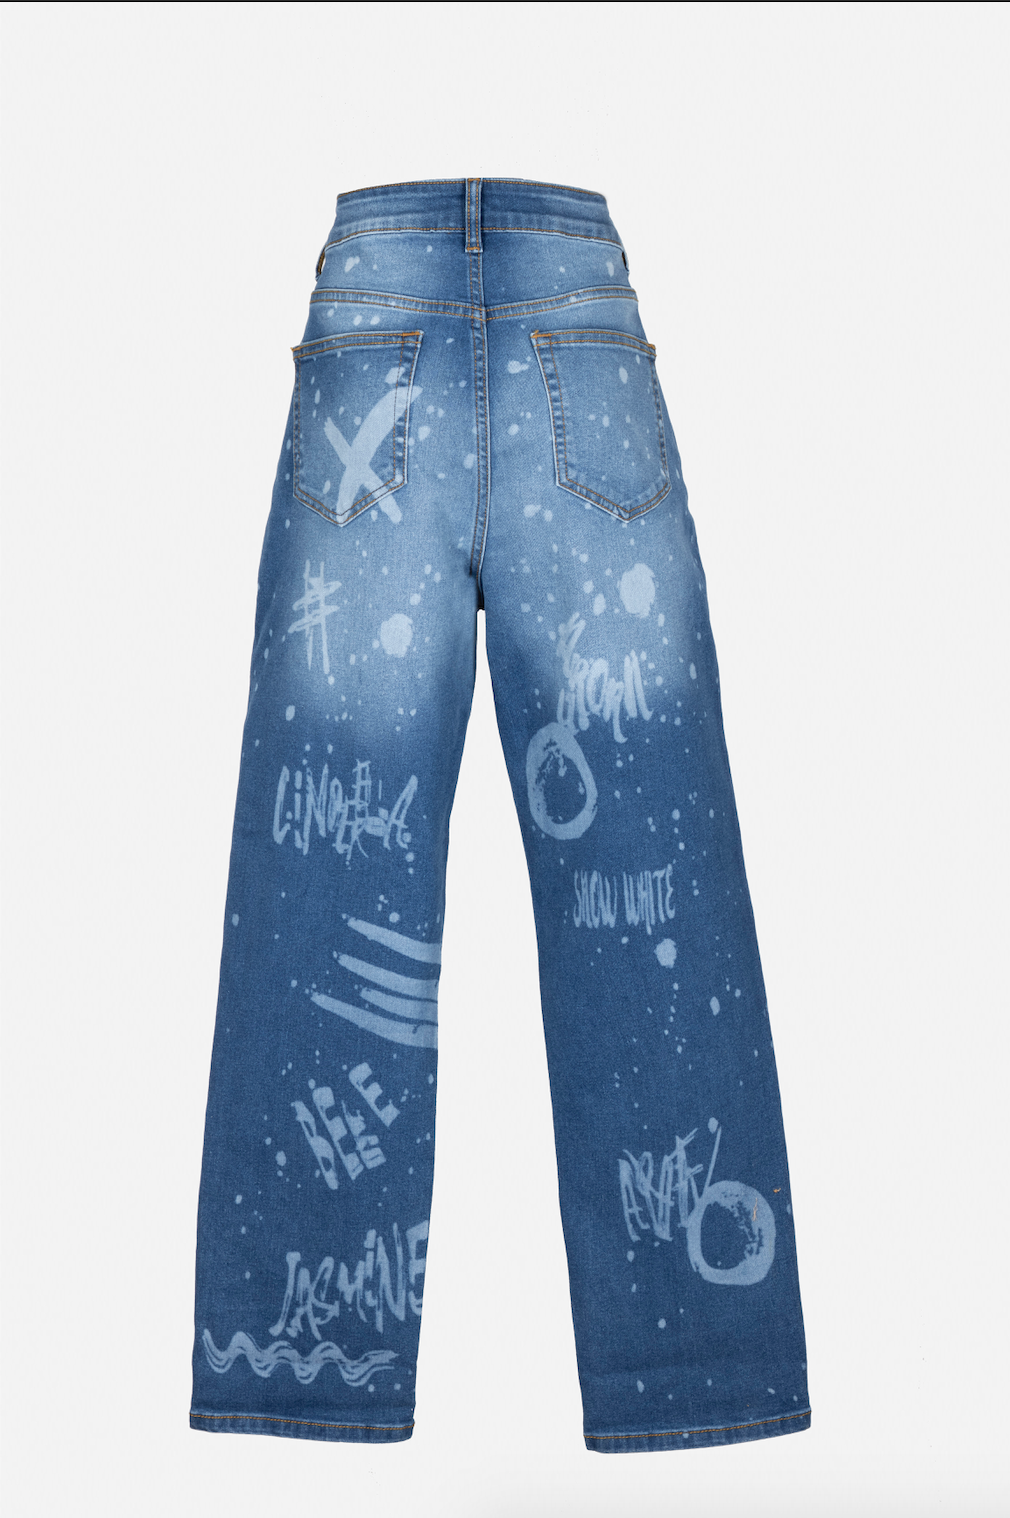 THE ICONS JEANS